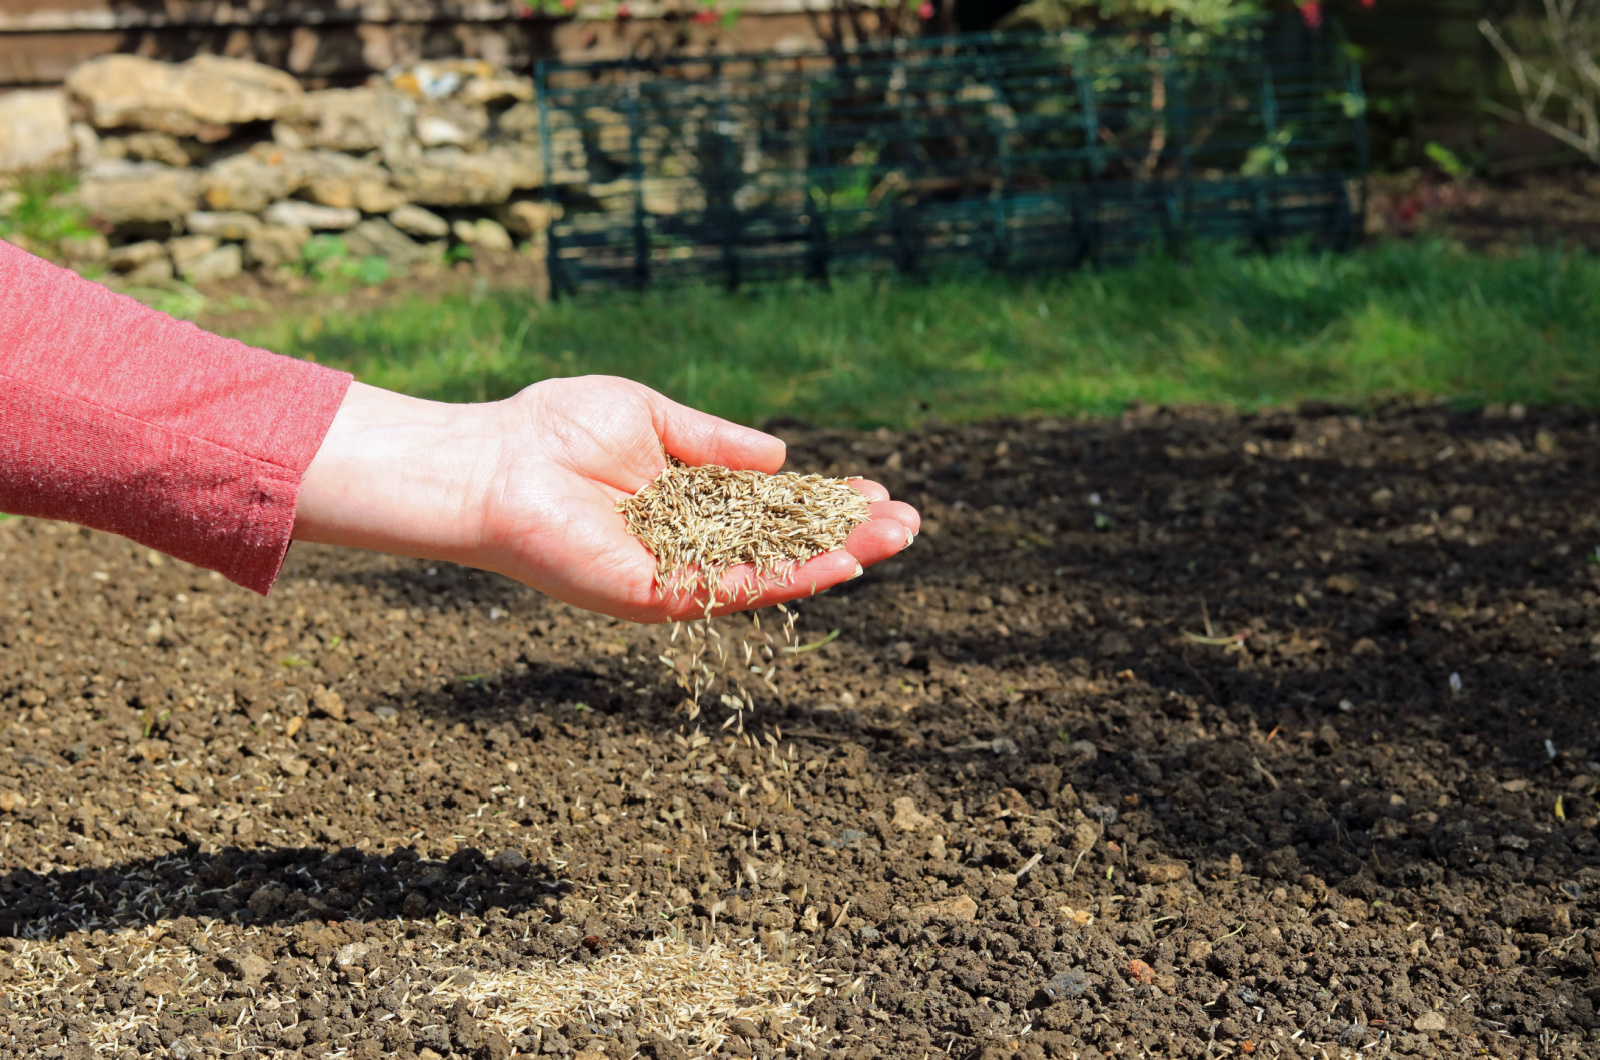 A Hand Sowing Grass Seeds On To A Garden Patch